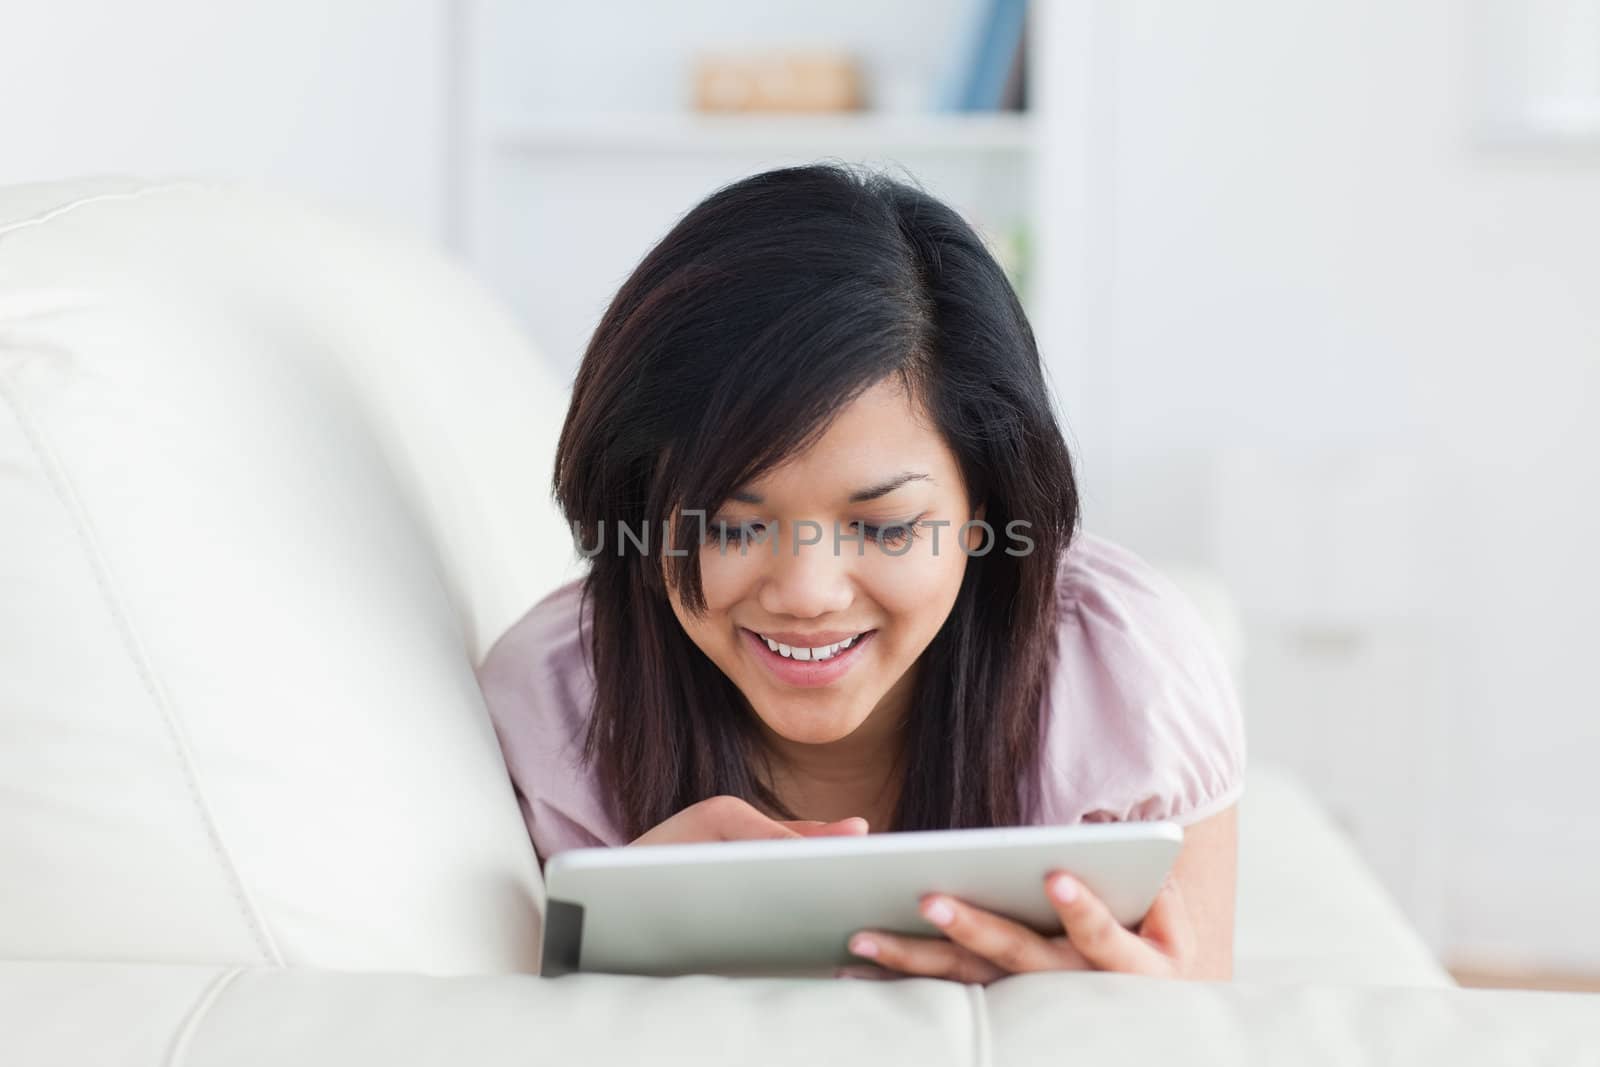 Woman resting on a sofa while touching a tablet in a living room